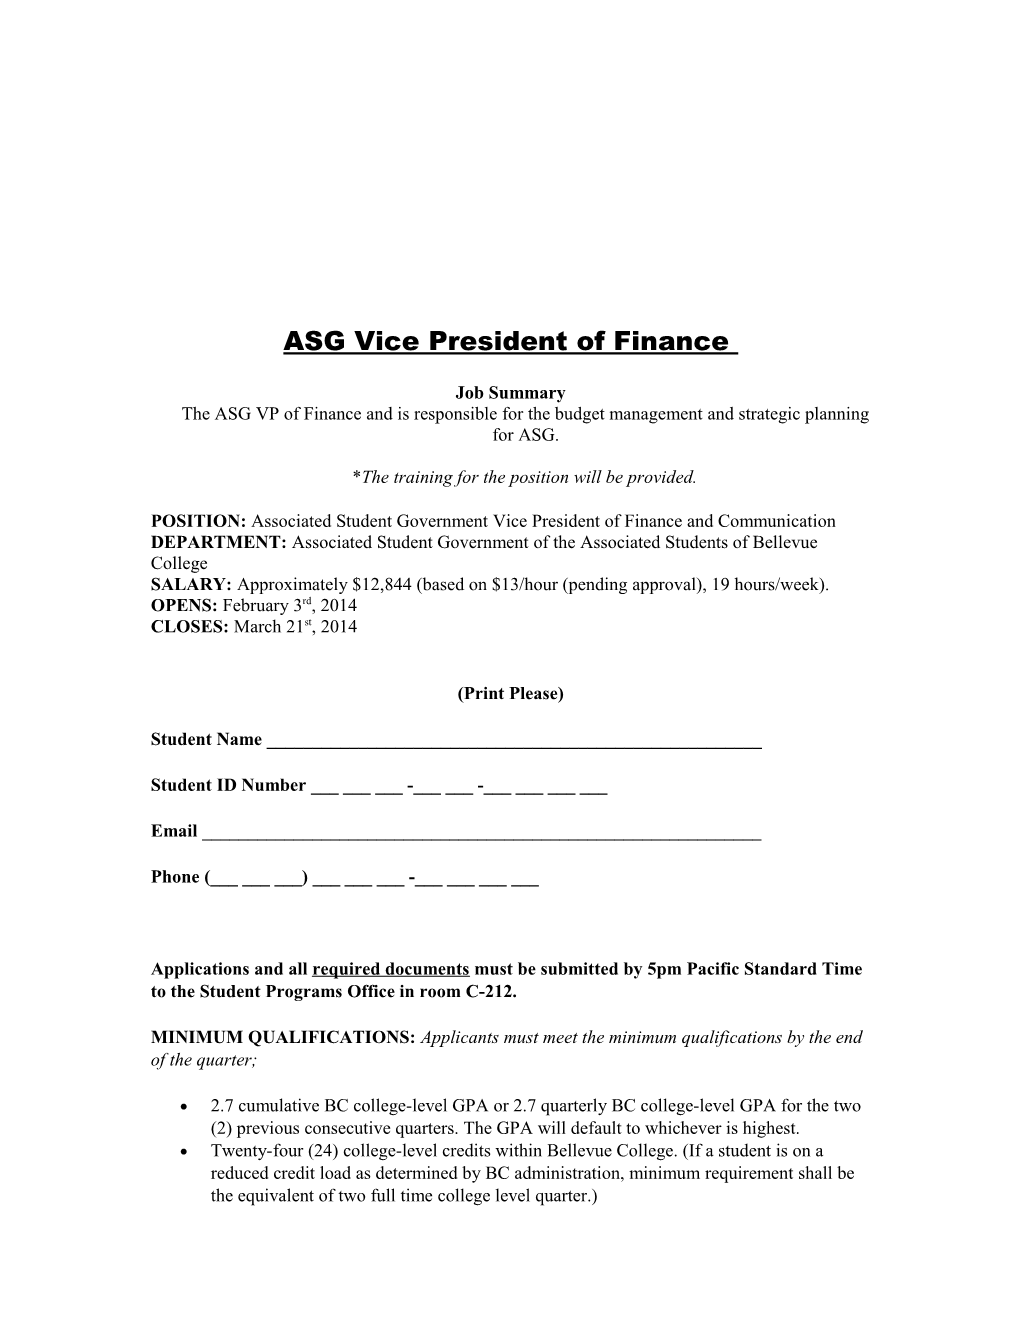 ASG Vice President of Finance